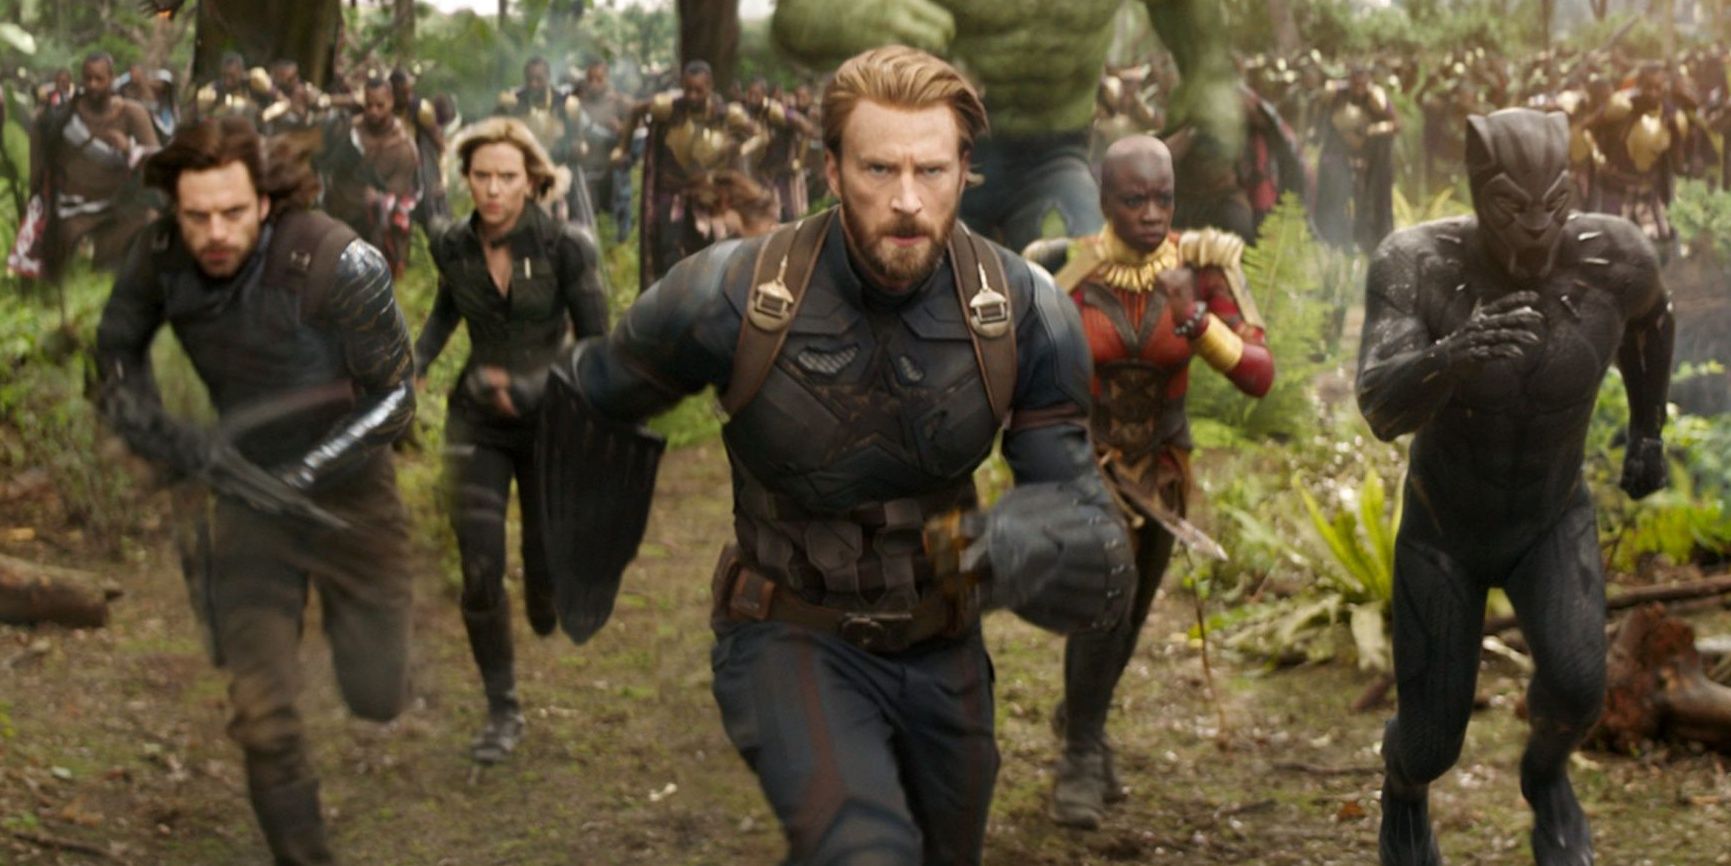 Avengers unite in Avengers: Infinity War to fight Thanos' army